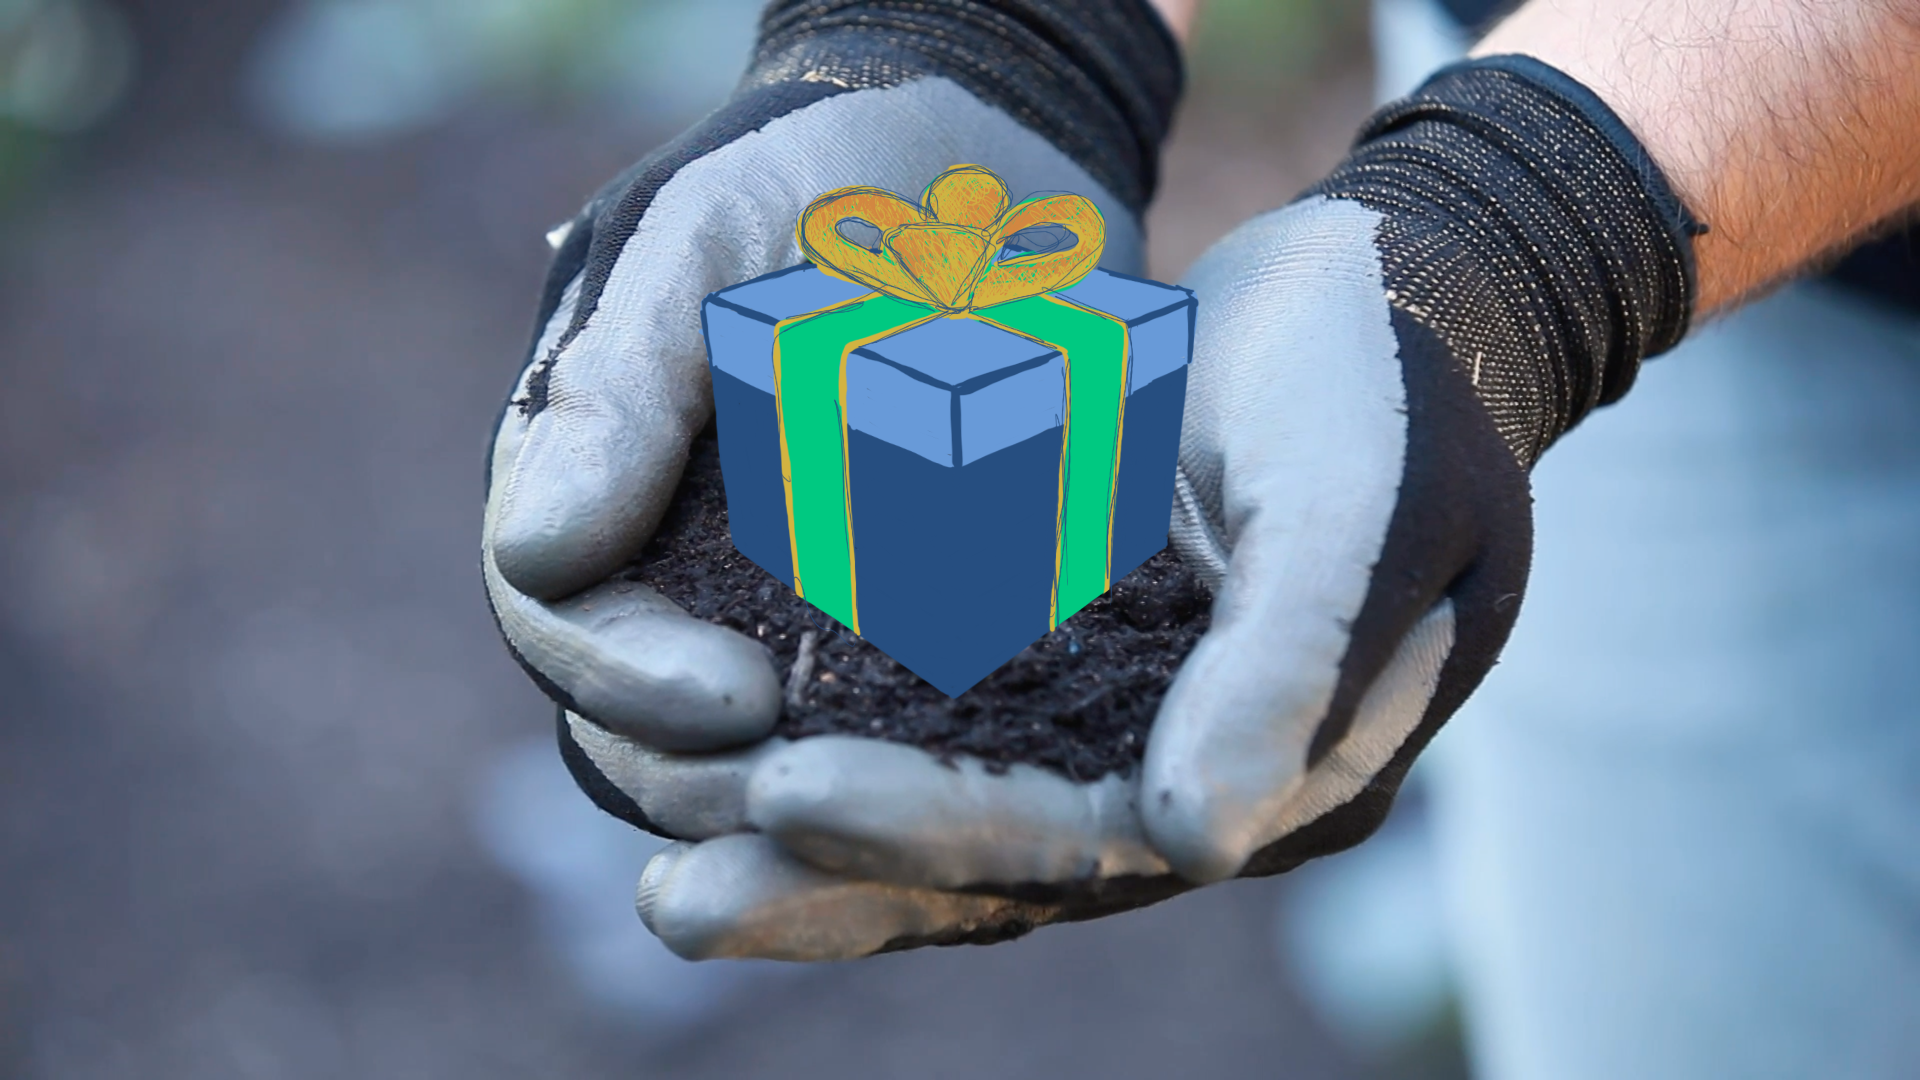 A gardener's hands hold a pile of dirt. An illustration of a gift box sits on top of the dirt.